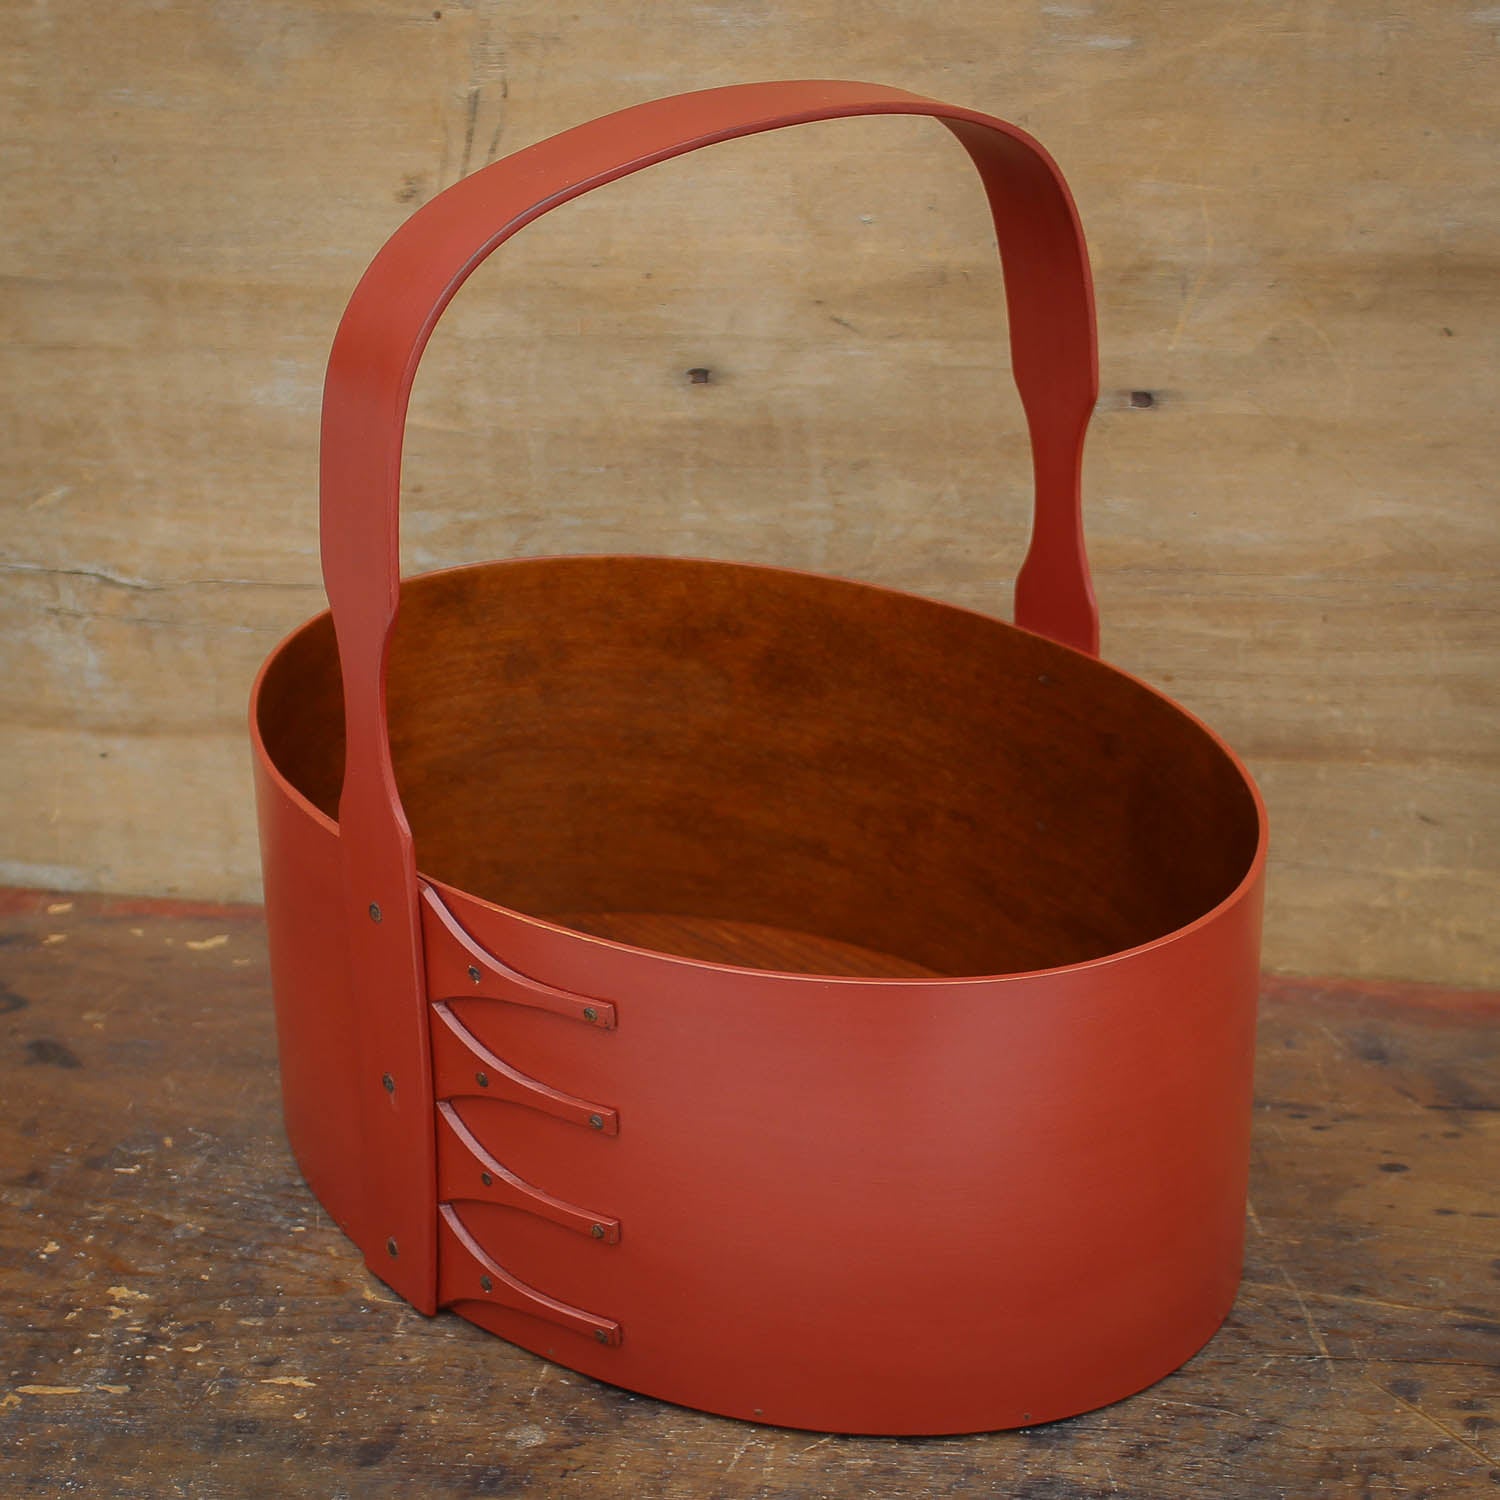 Shaker Carrier, Size #6, LeHays Shaker Boxes, Handcrafted in Maine, Red Milk Paint Finish, Side View